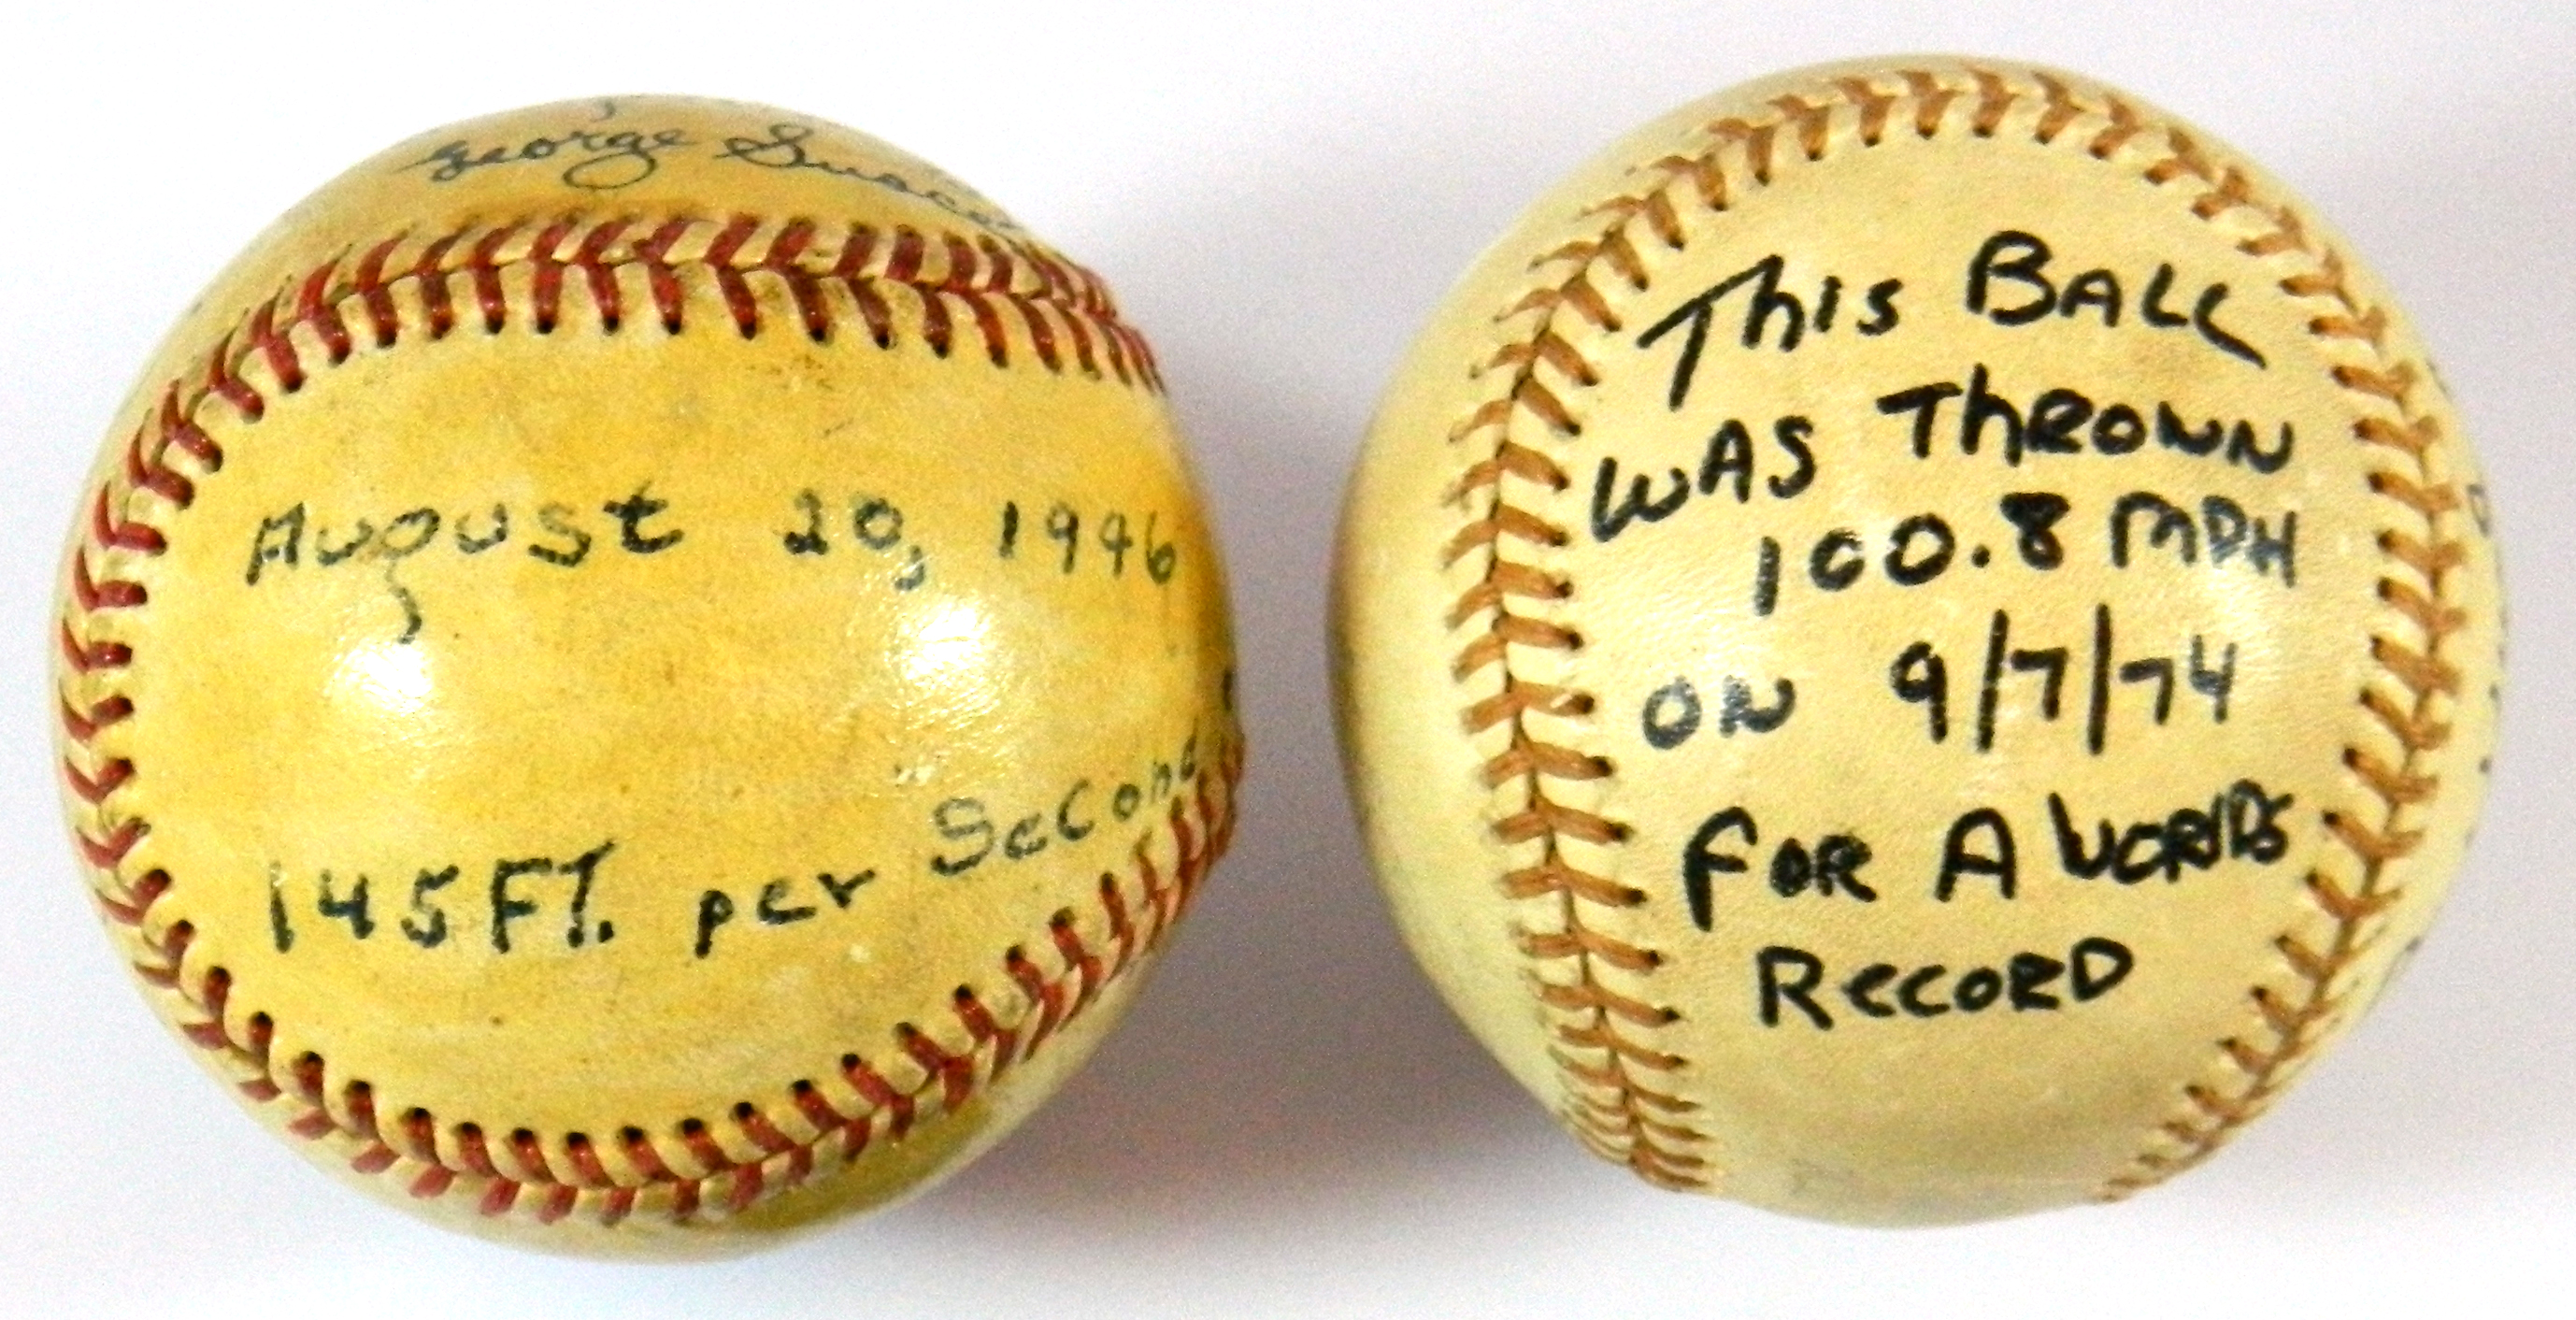 Fastest Pitched Baseballs in History Up for Auction